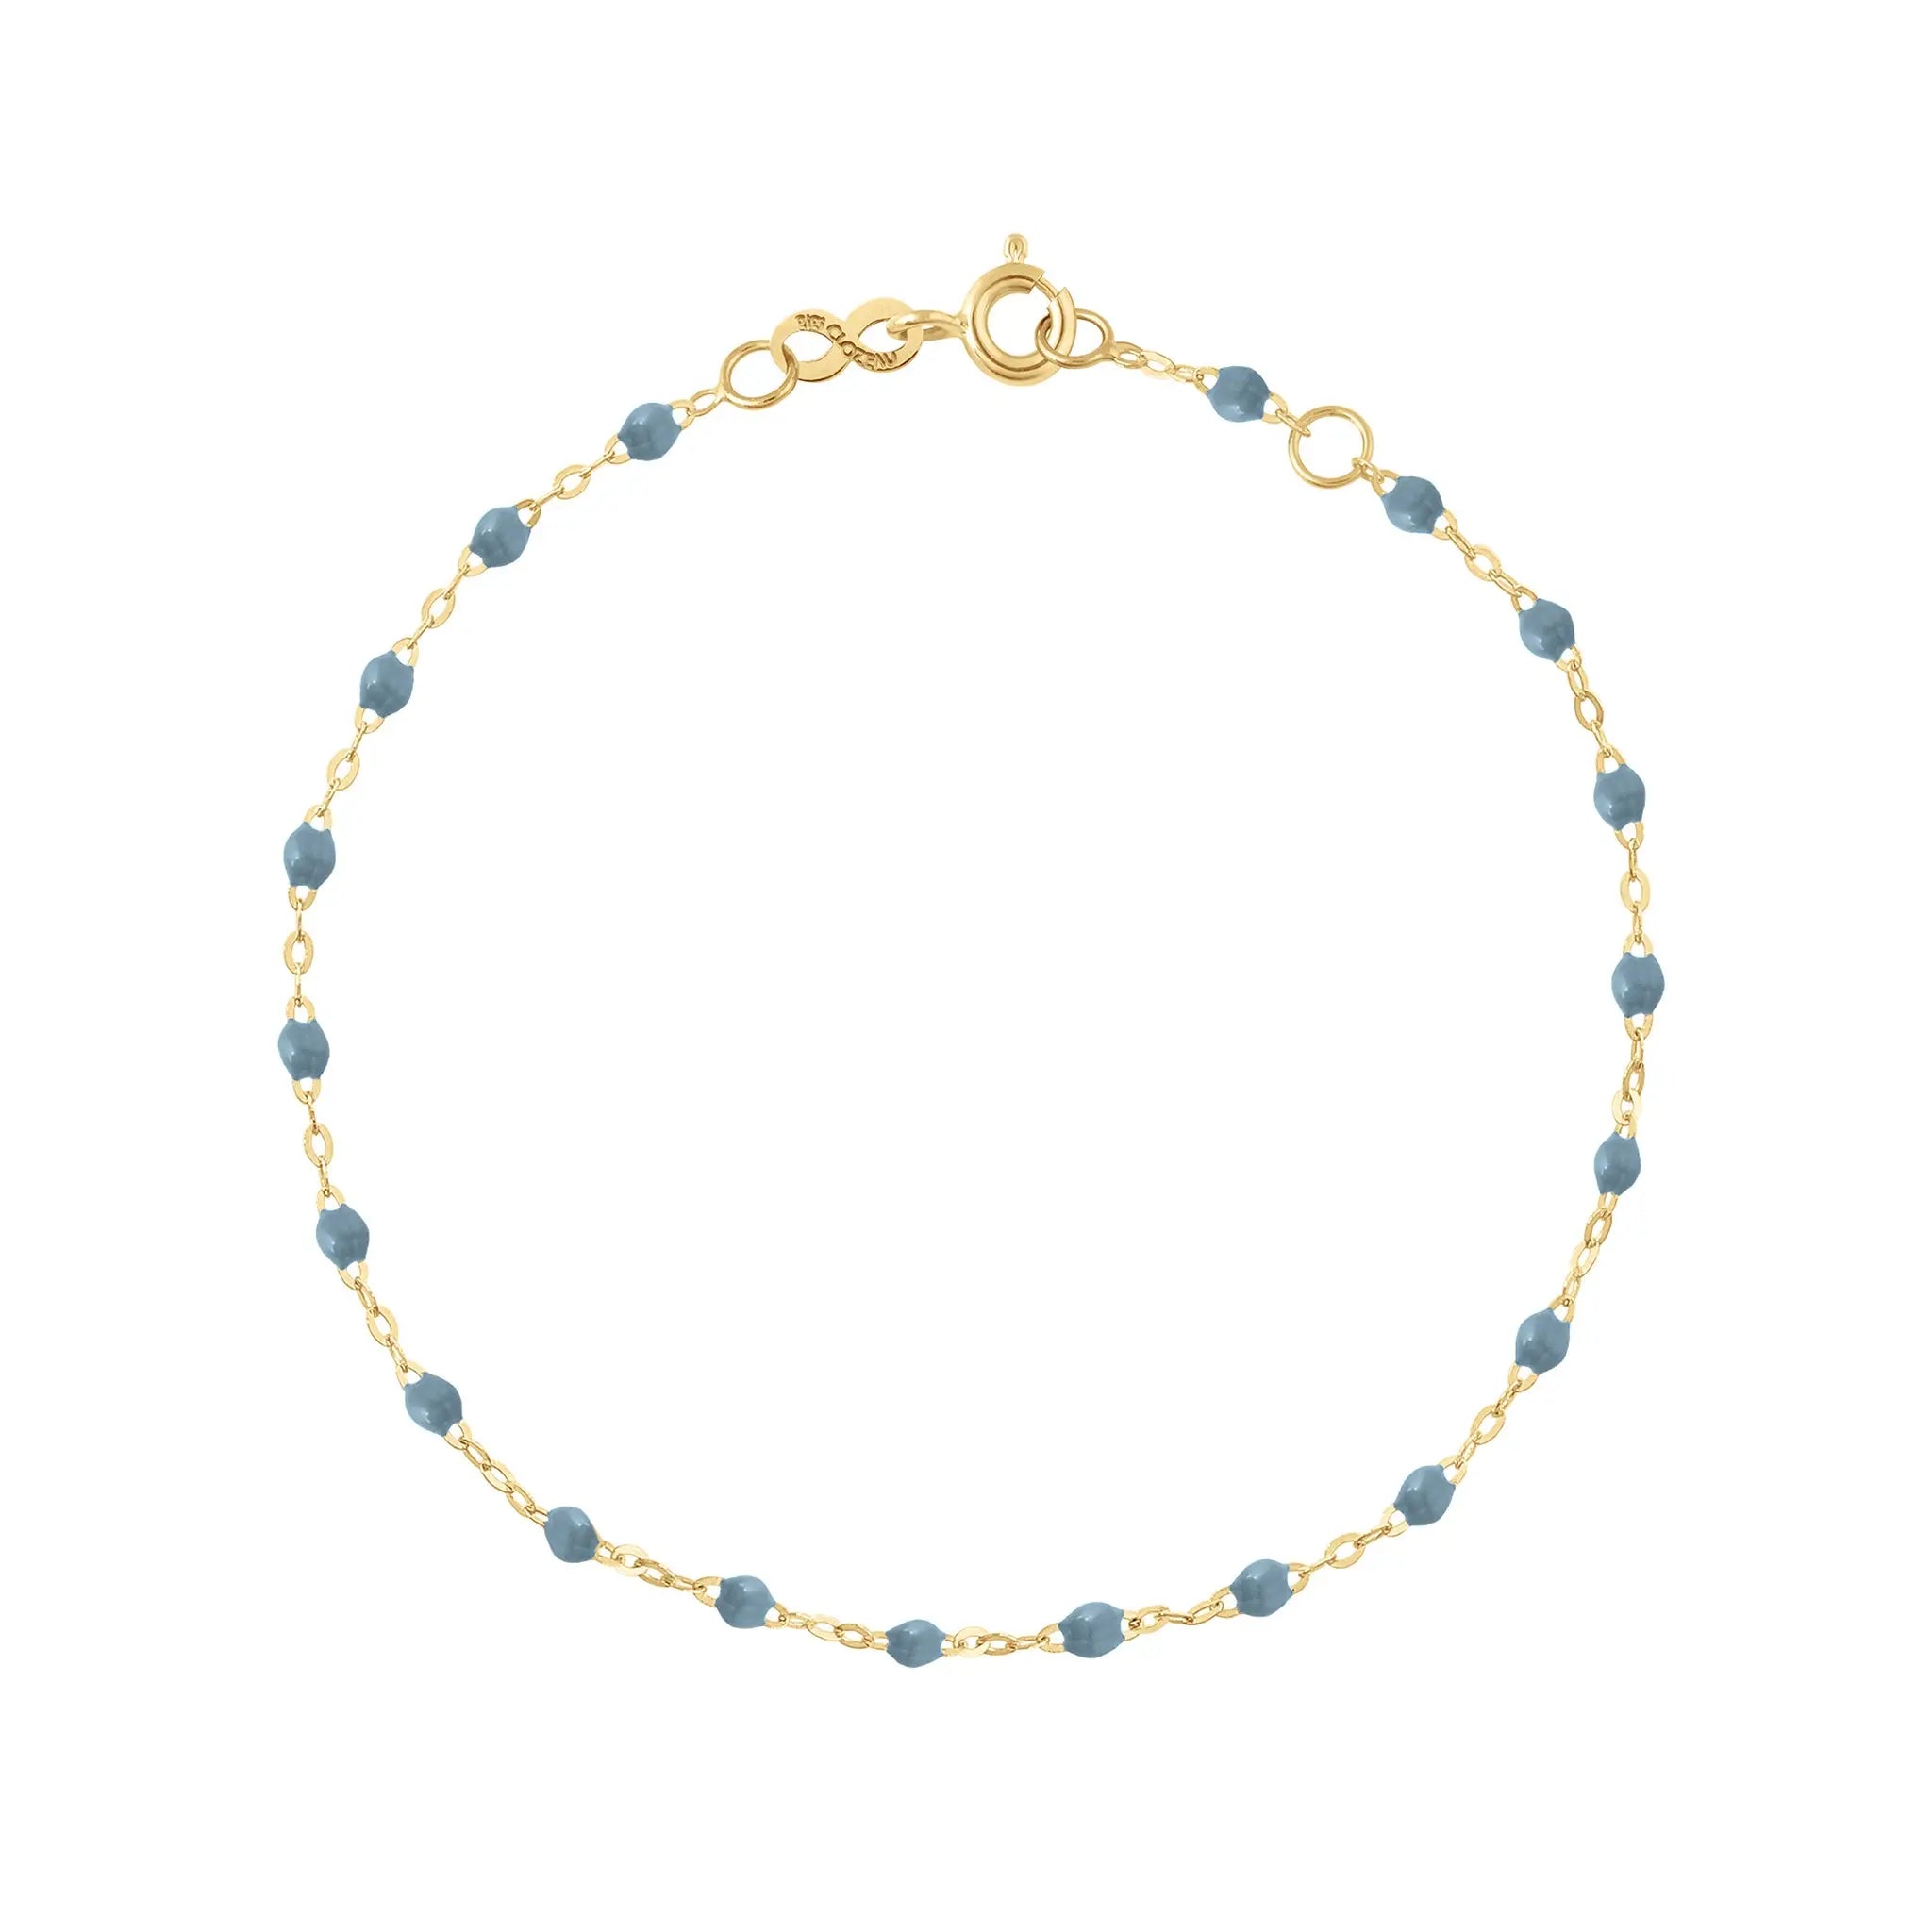 igi bracelet by gigi CLOZEAU features 18K Yellow Gold, and unique Jean jewels for a simple, everyday look.   Each jewel is unique, artisanally made in their family-owned workshop. 18K yellow gold and resin. The bracelet measures 6.7 inches with adjustable clasp at 6.3 inches.